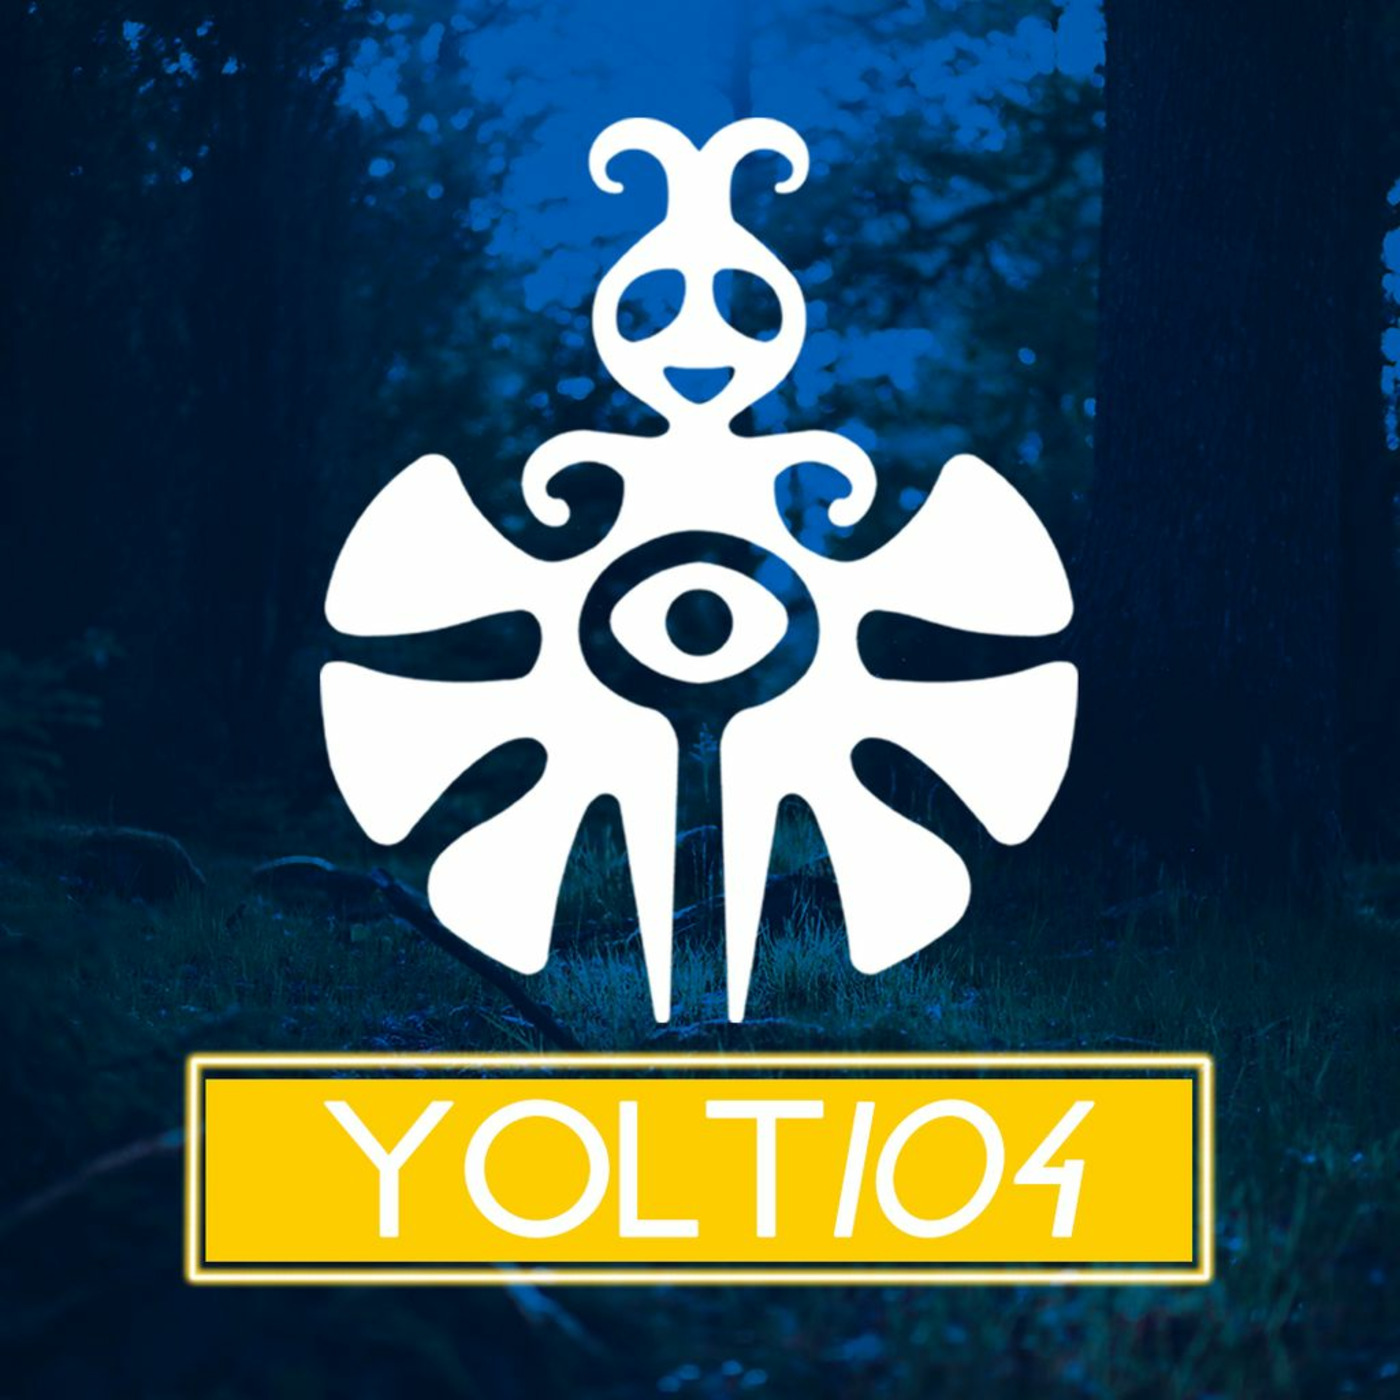 You Only Live Trance Episode 104 (#YOLT104) - Ness